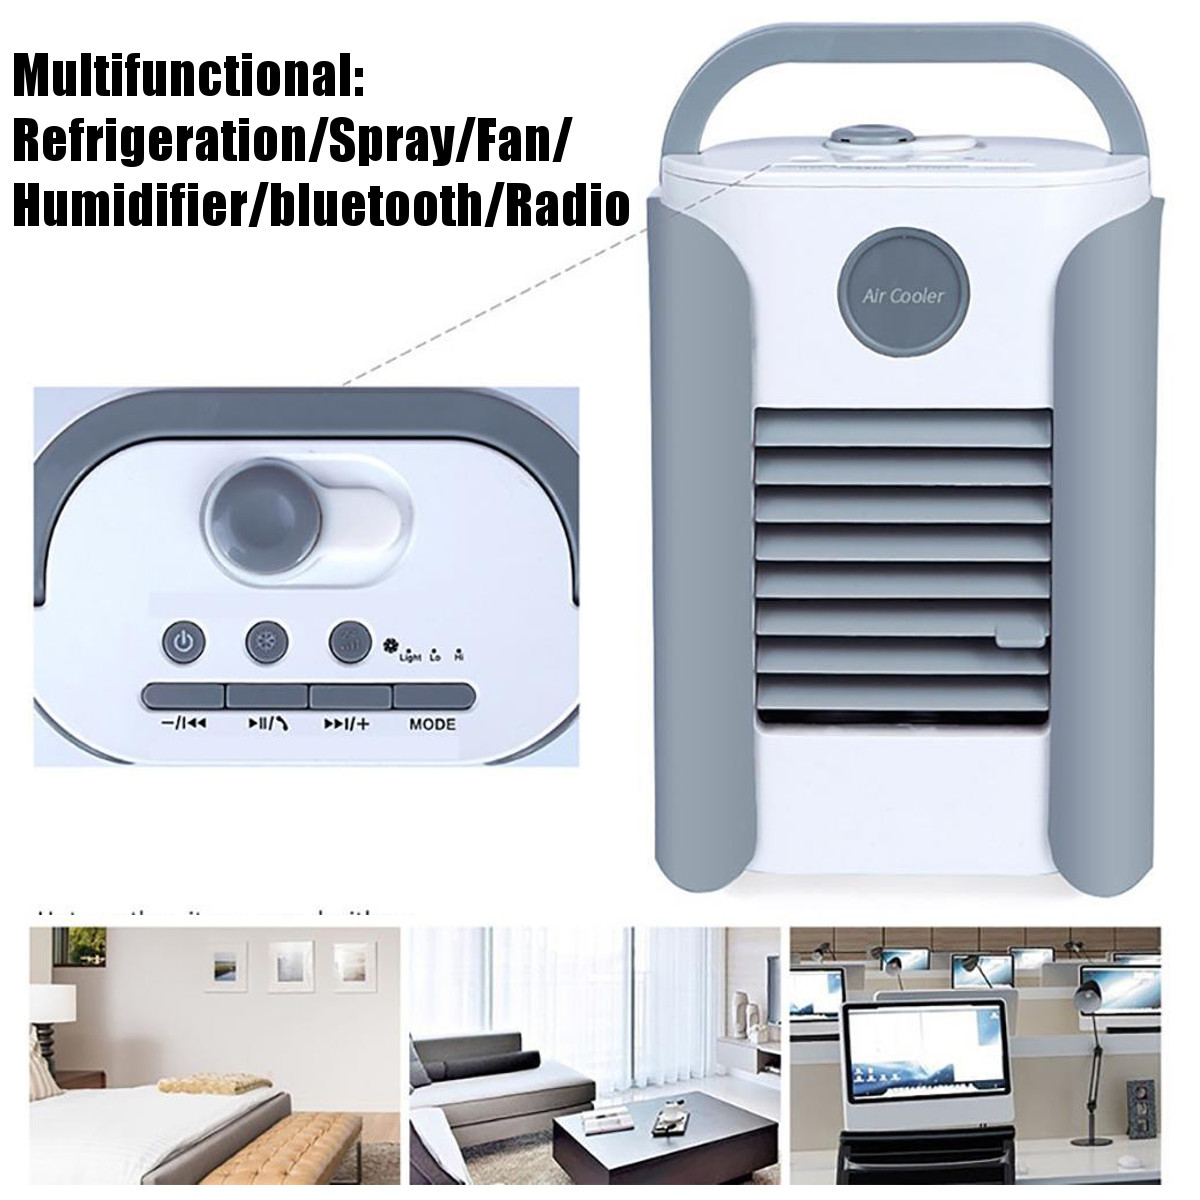 USB-Mini-Portable-Bluetooth-Radio-Air-Cooler-Humidifier-Conditioning-Mute-Spray-Cooling-Fan-1690137-7